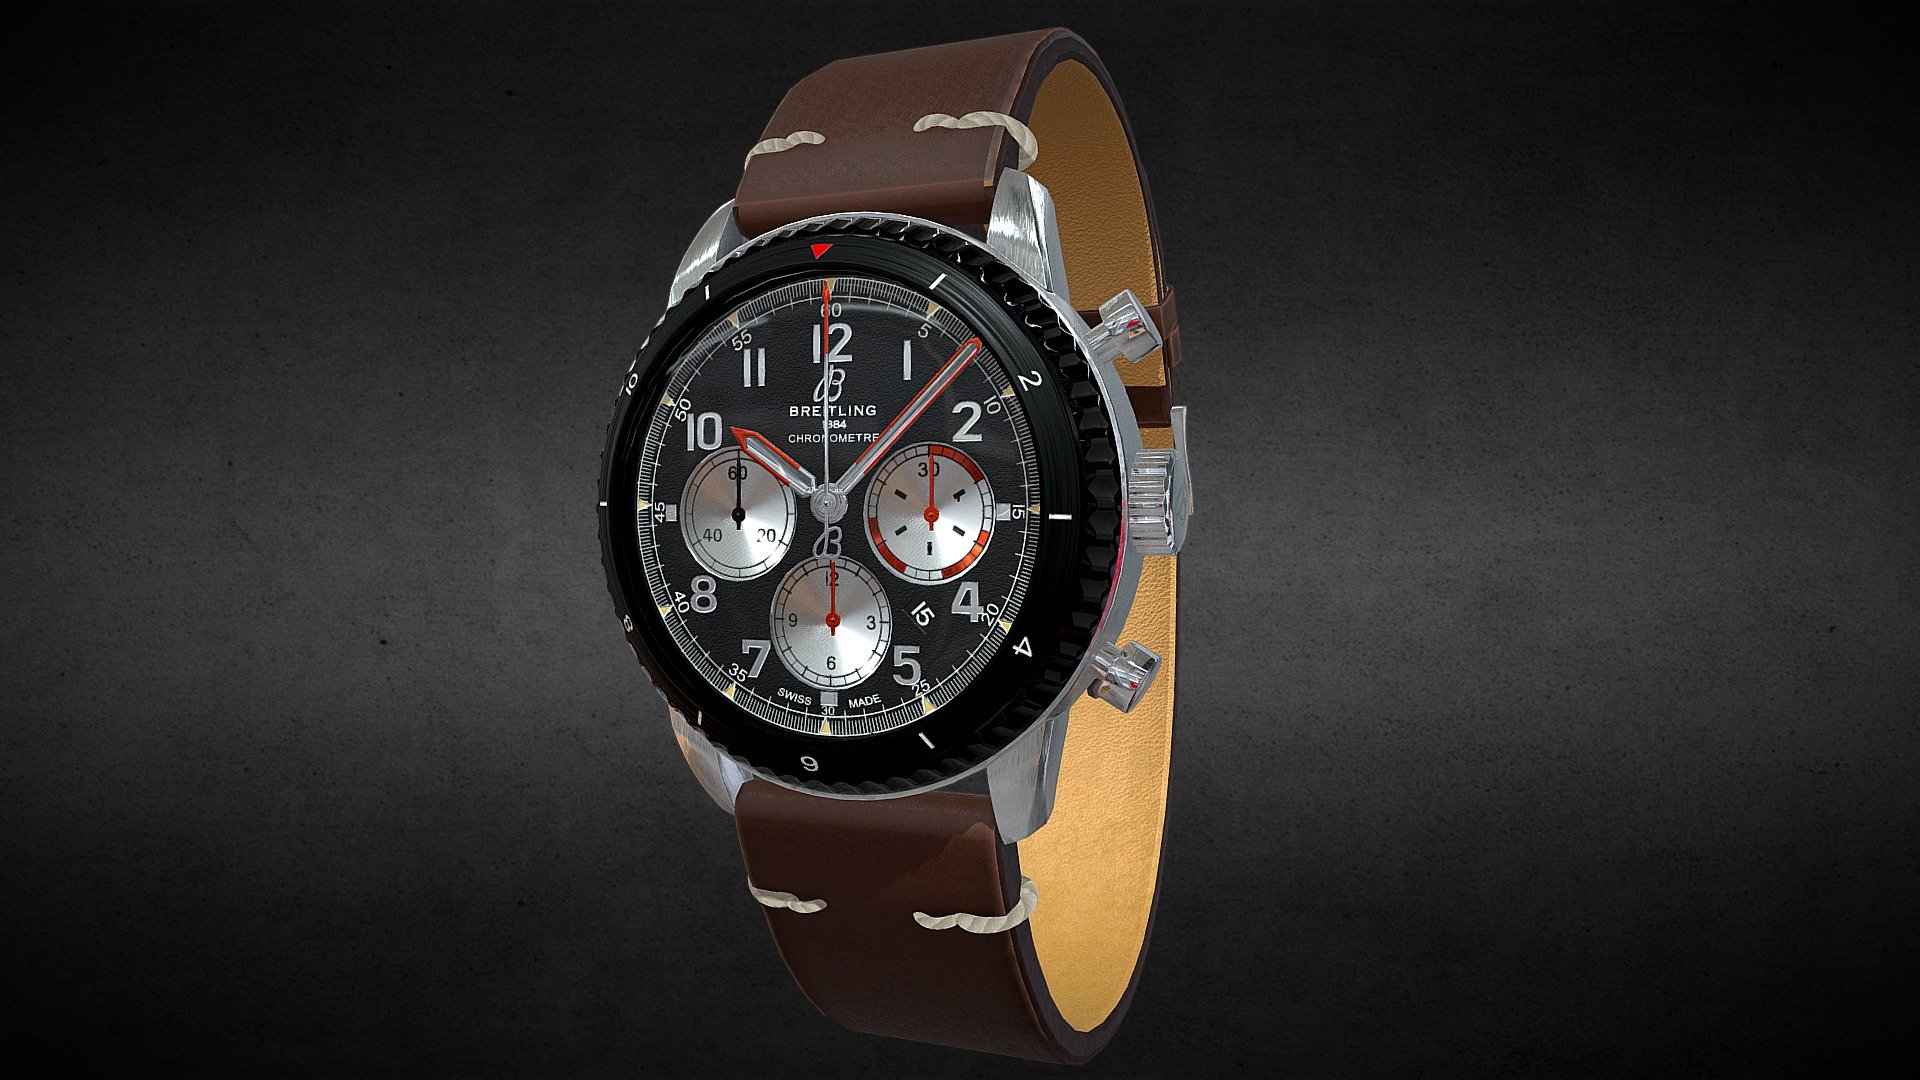 Awesome stainless steel Breitling Aviator Watch․
Use for Unreal Engine 4 and Unity3D. Try in augmented reality in the AR-Watches app. 
Links to the app: Android, iOS

Currently available for download in FBX format.

3D model developed by AR-Watches

Disclaimer: We do not own the design of the watch, we only made the 3D model 3d model